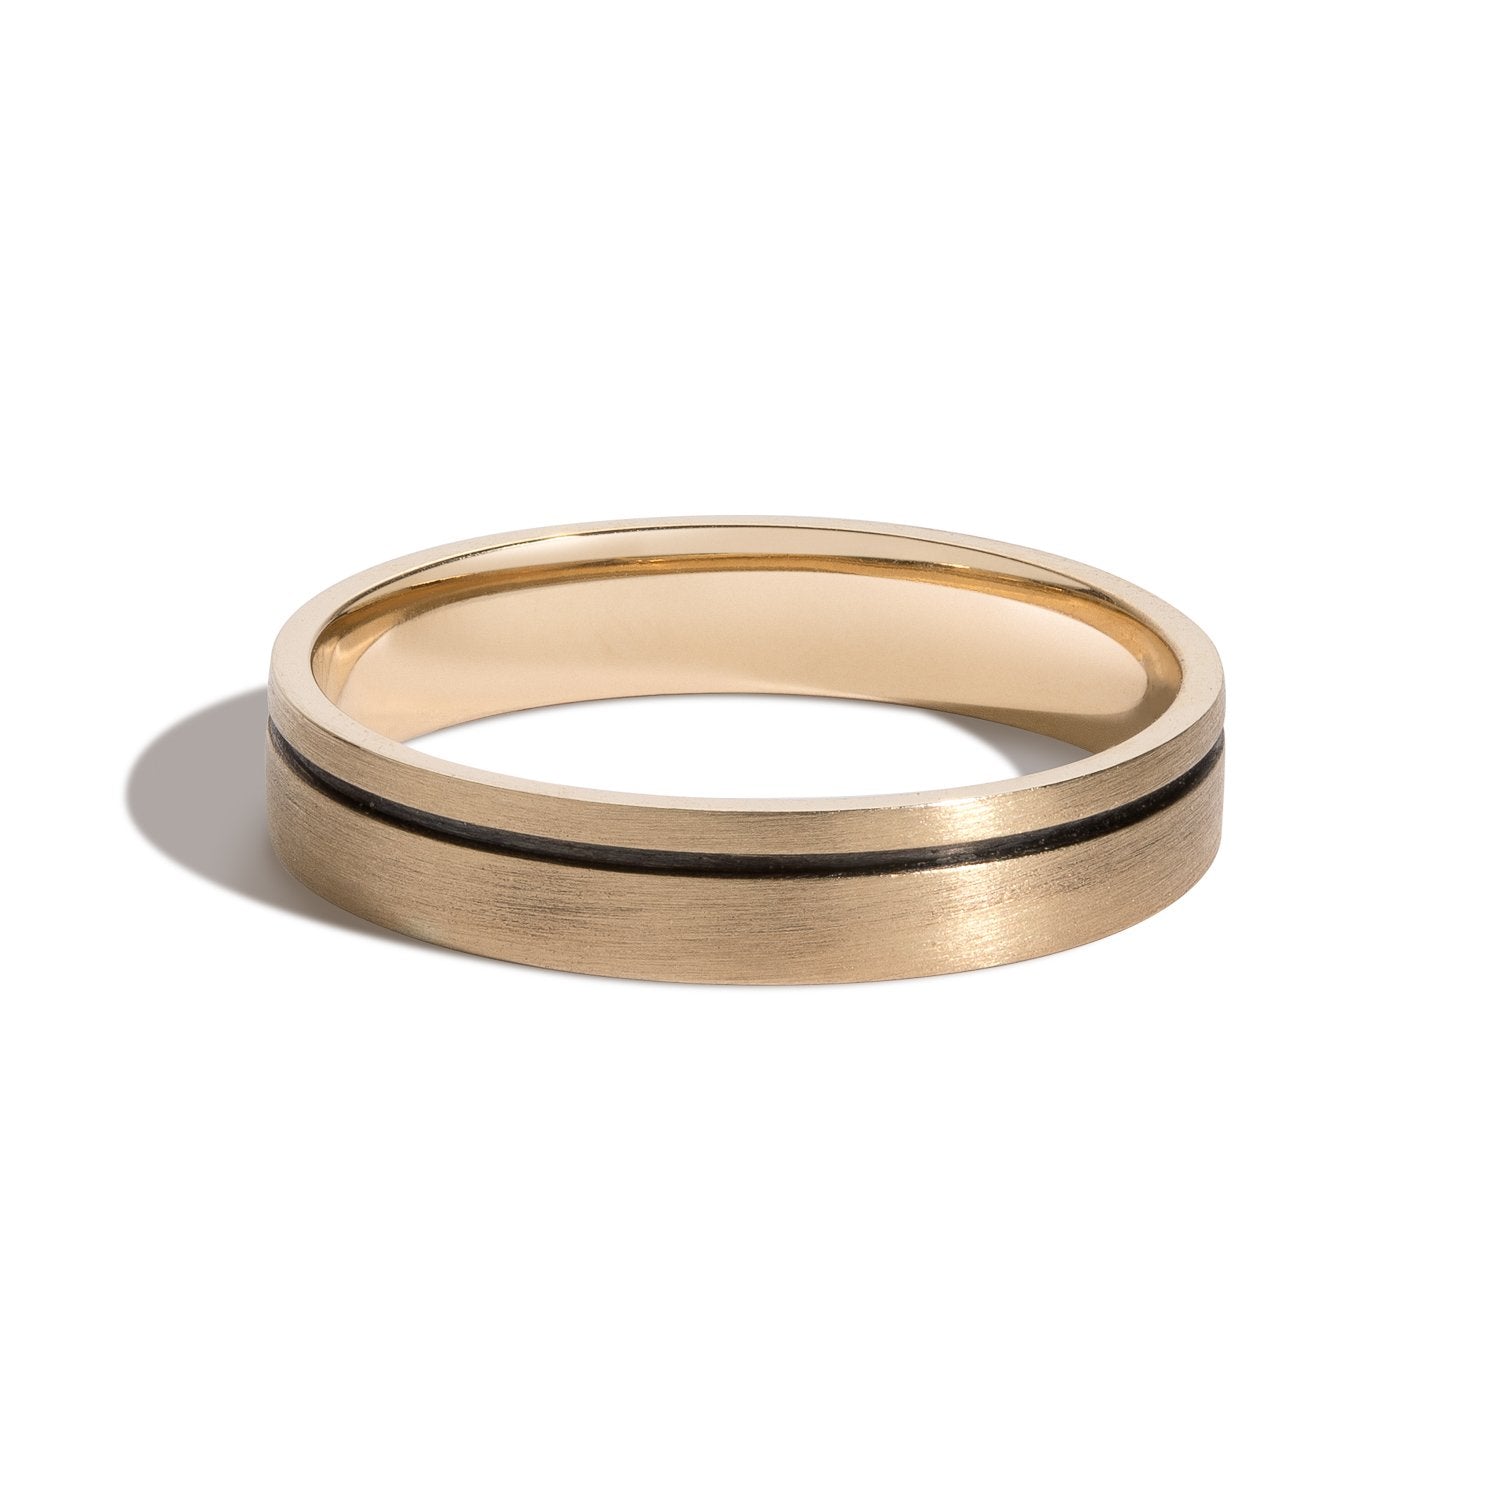 IN STOCK Gold Every Love 4mm Black Rhodium Groove Band - Size 8.75